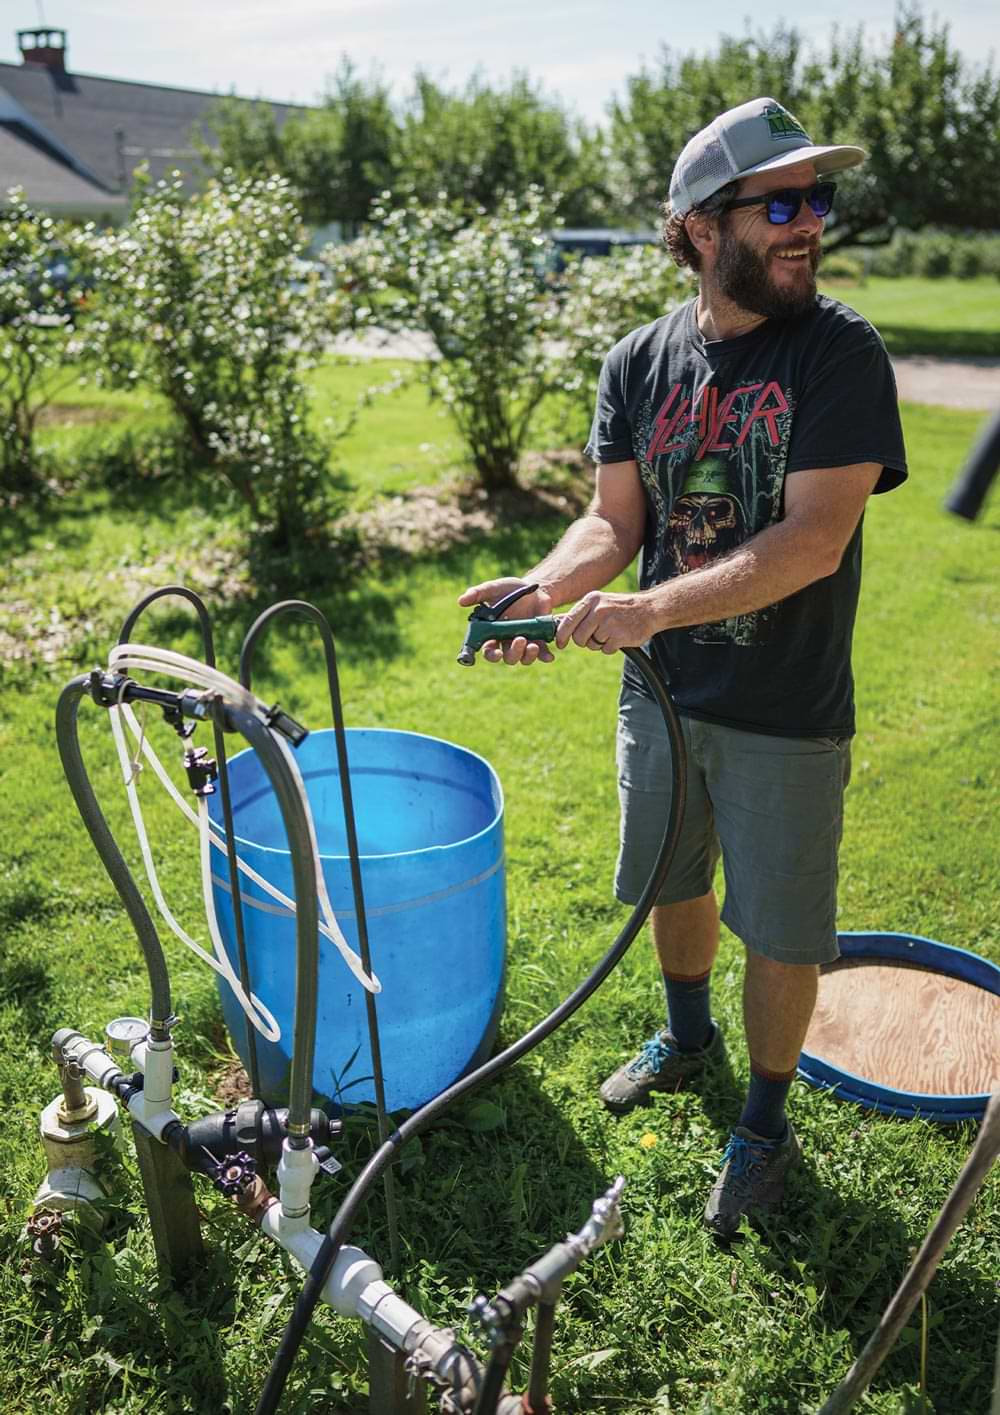 Pete Bartlett, wearing a cap, a t-shirt, shorts, and sunglasses, looks off camera while holding a water hose and standing next to a large plastic blue barrel on a vibrant green yard